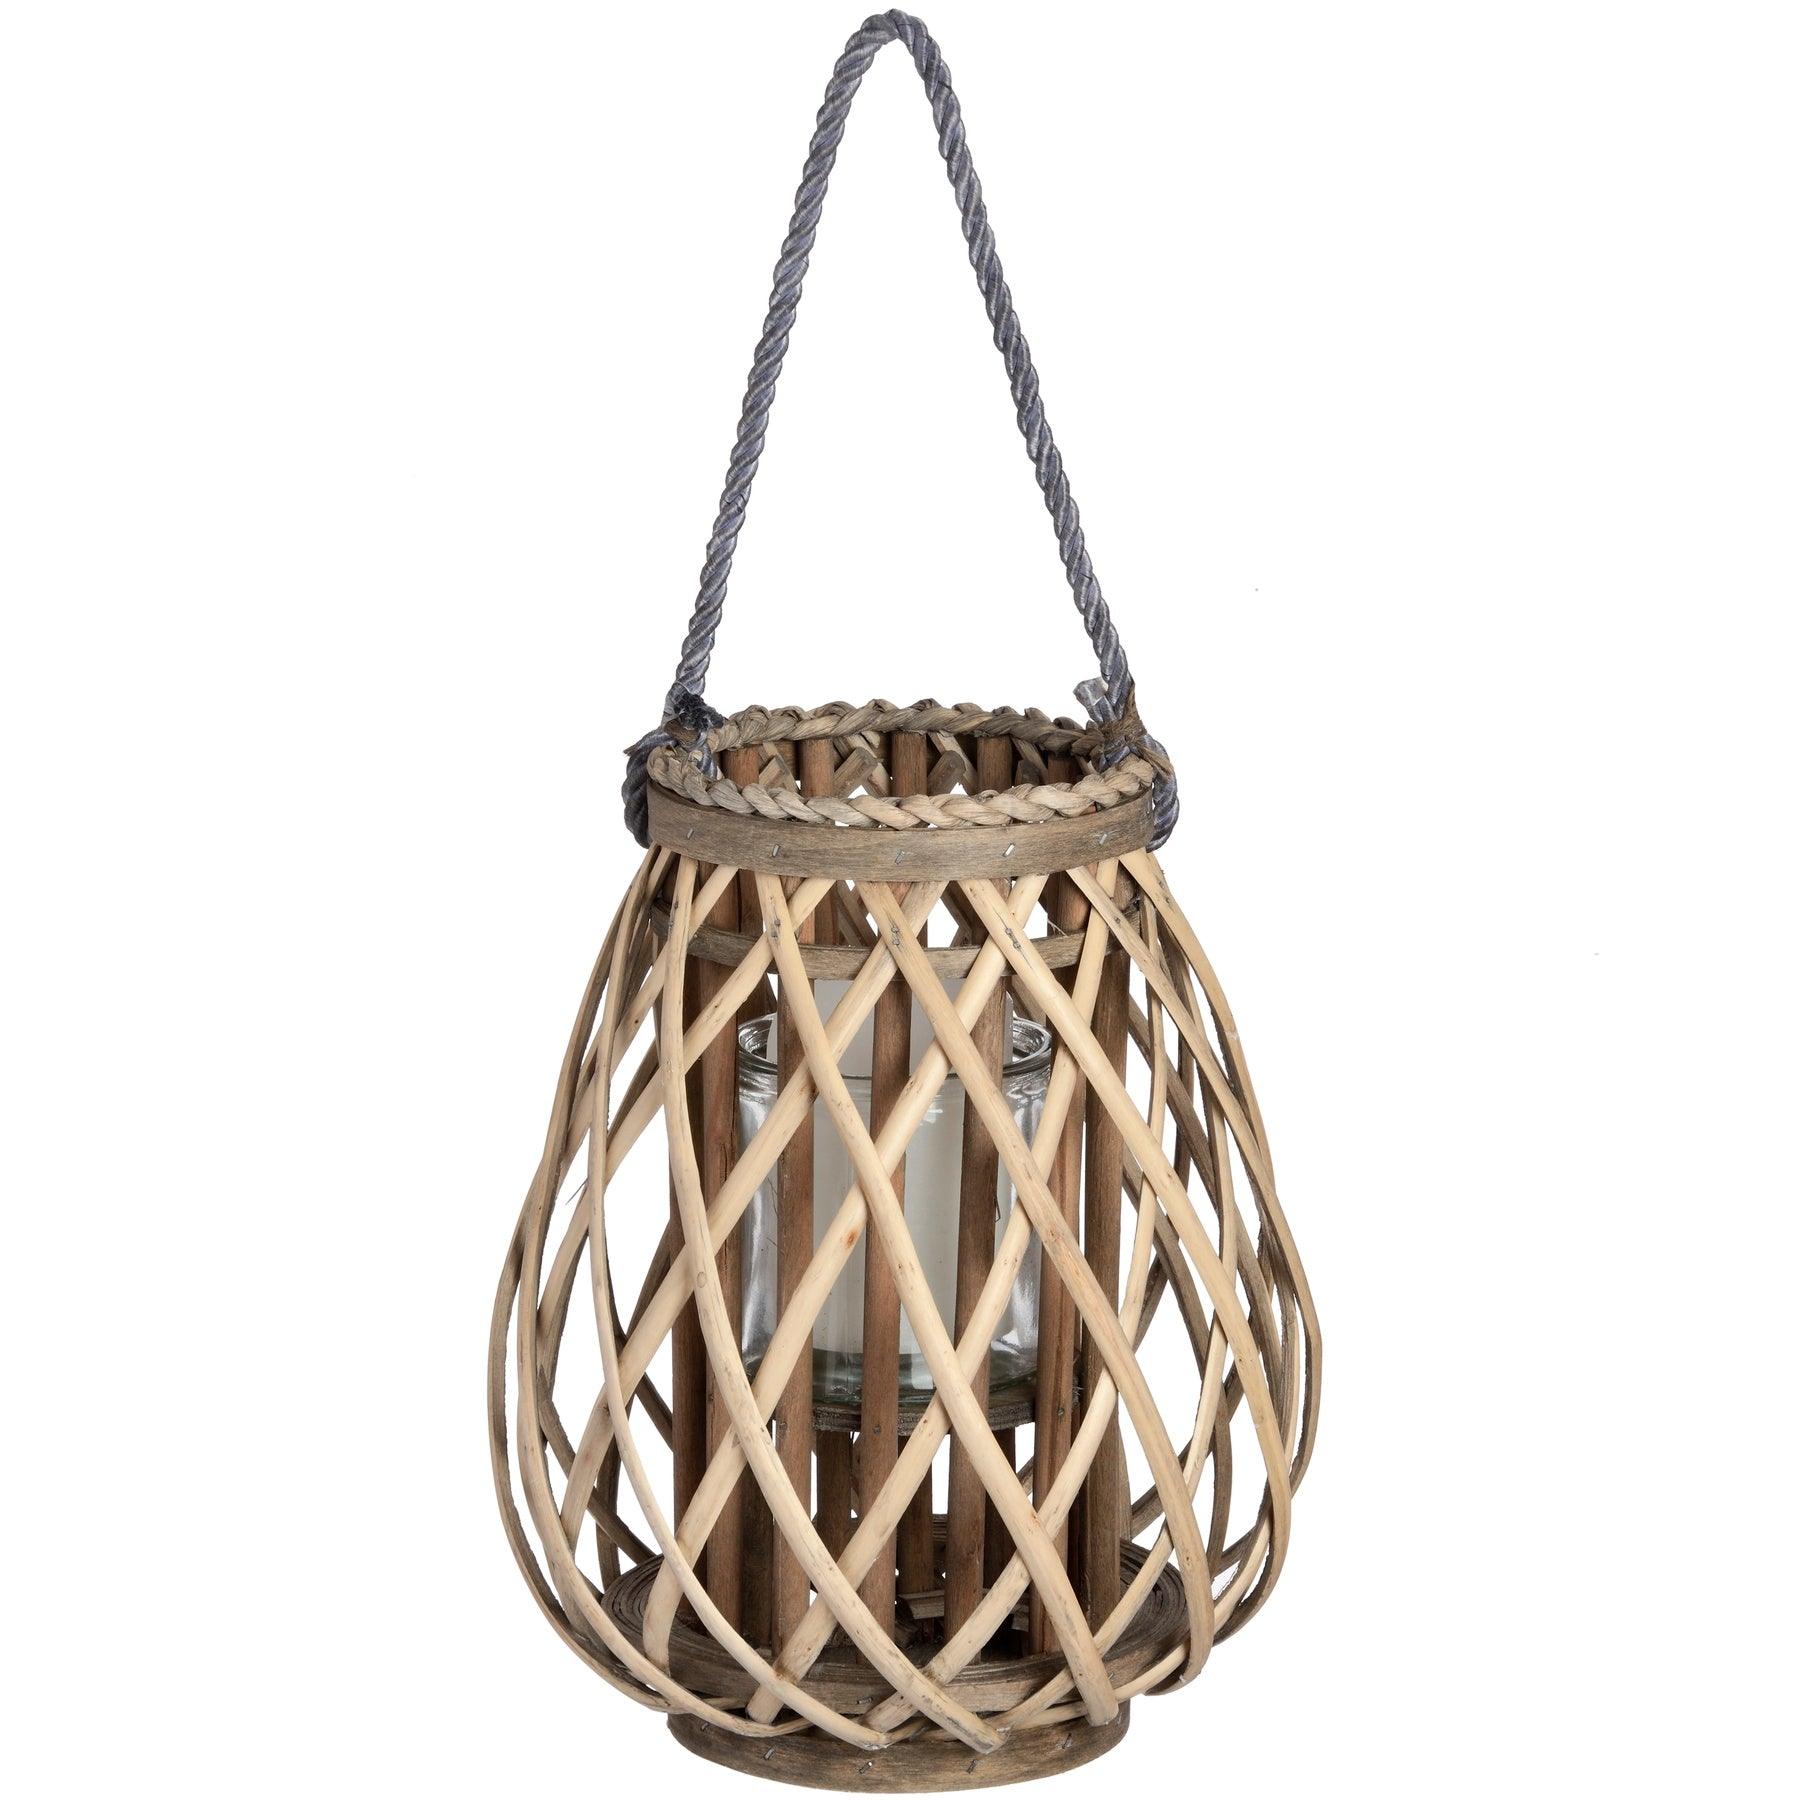 View Small Wicker Bulbous Lantern information